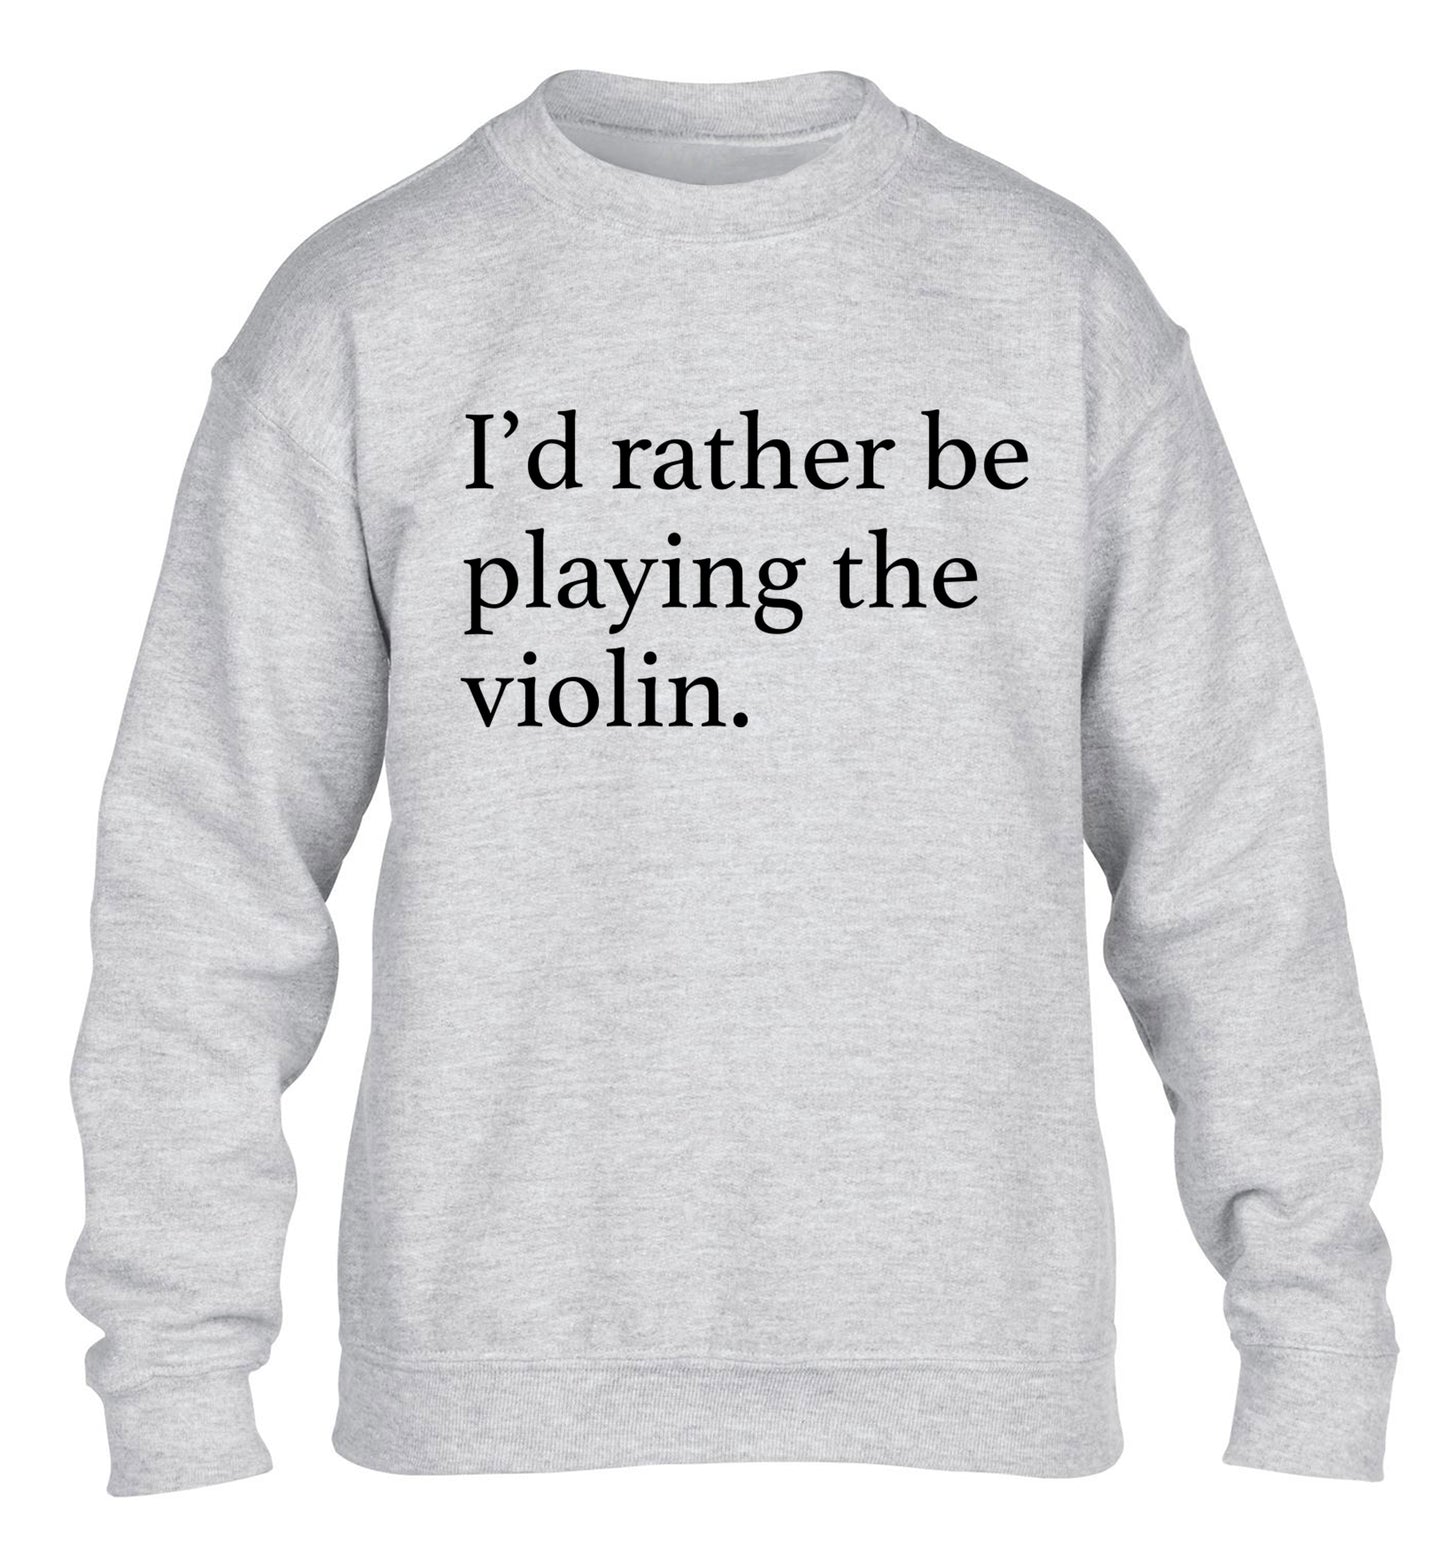 I'd rather be playing the violin children's grey sweater 12-13 Years